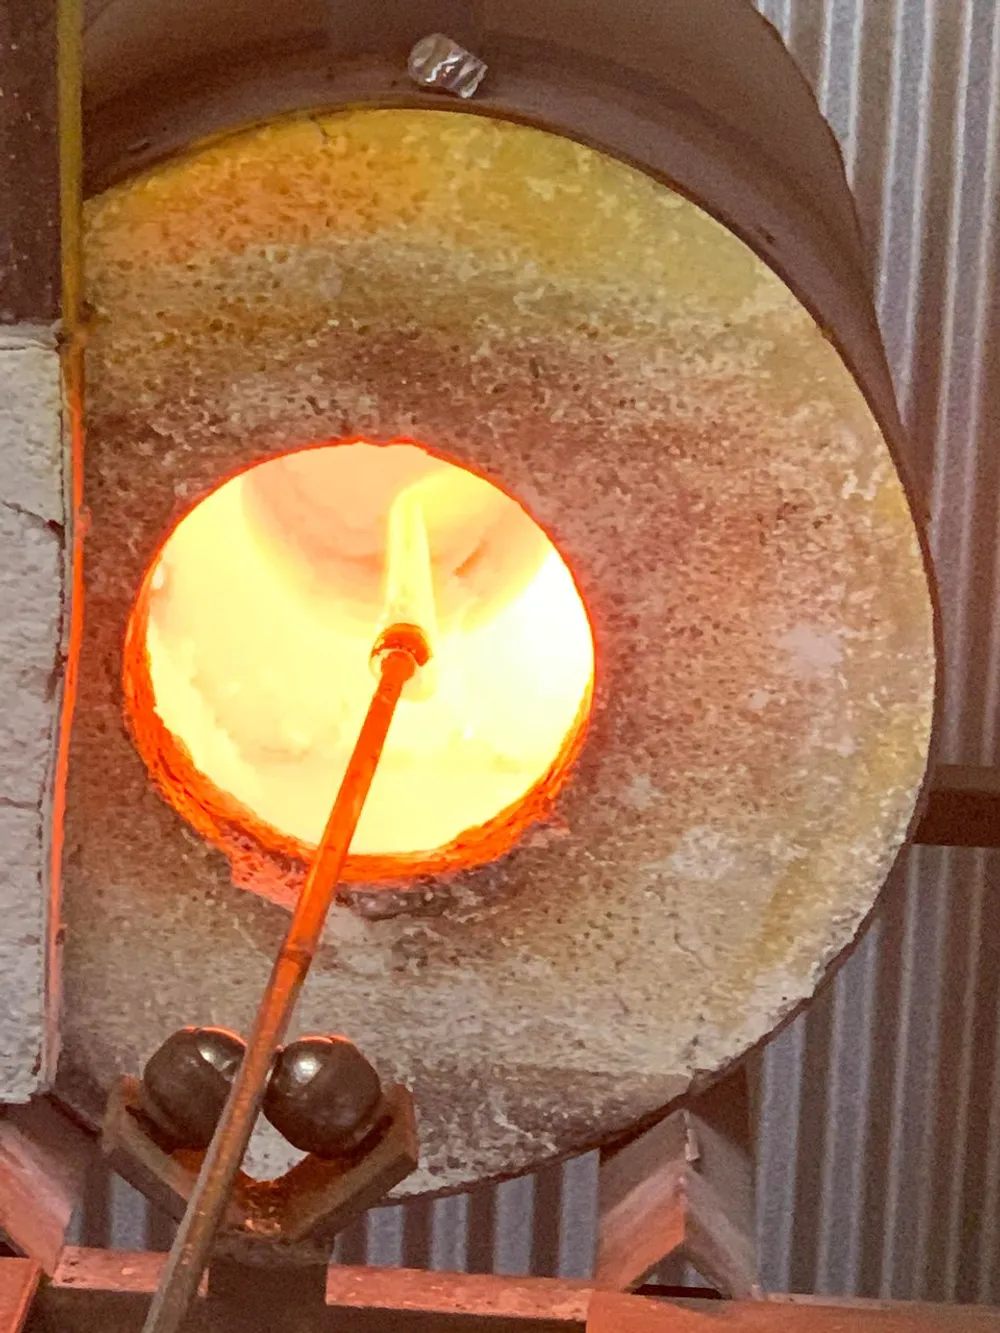 This image features a glowing glass furnace with an opening through which a glassblowers rod is inserted hinting at the process of glassblowing